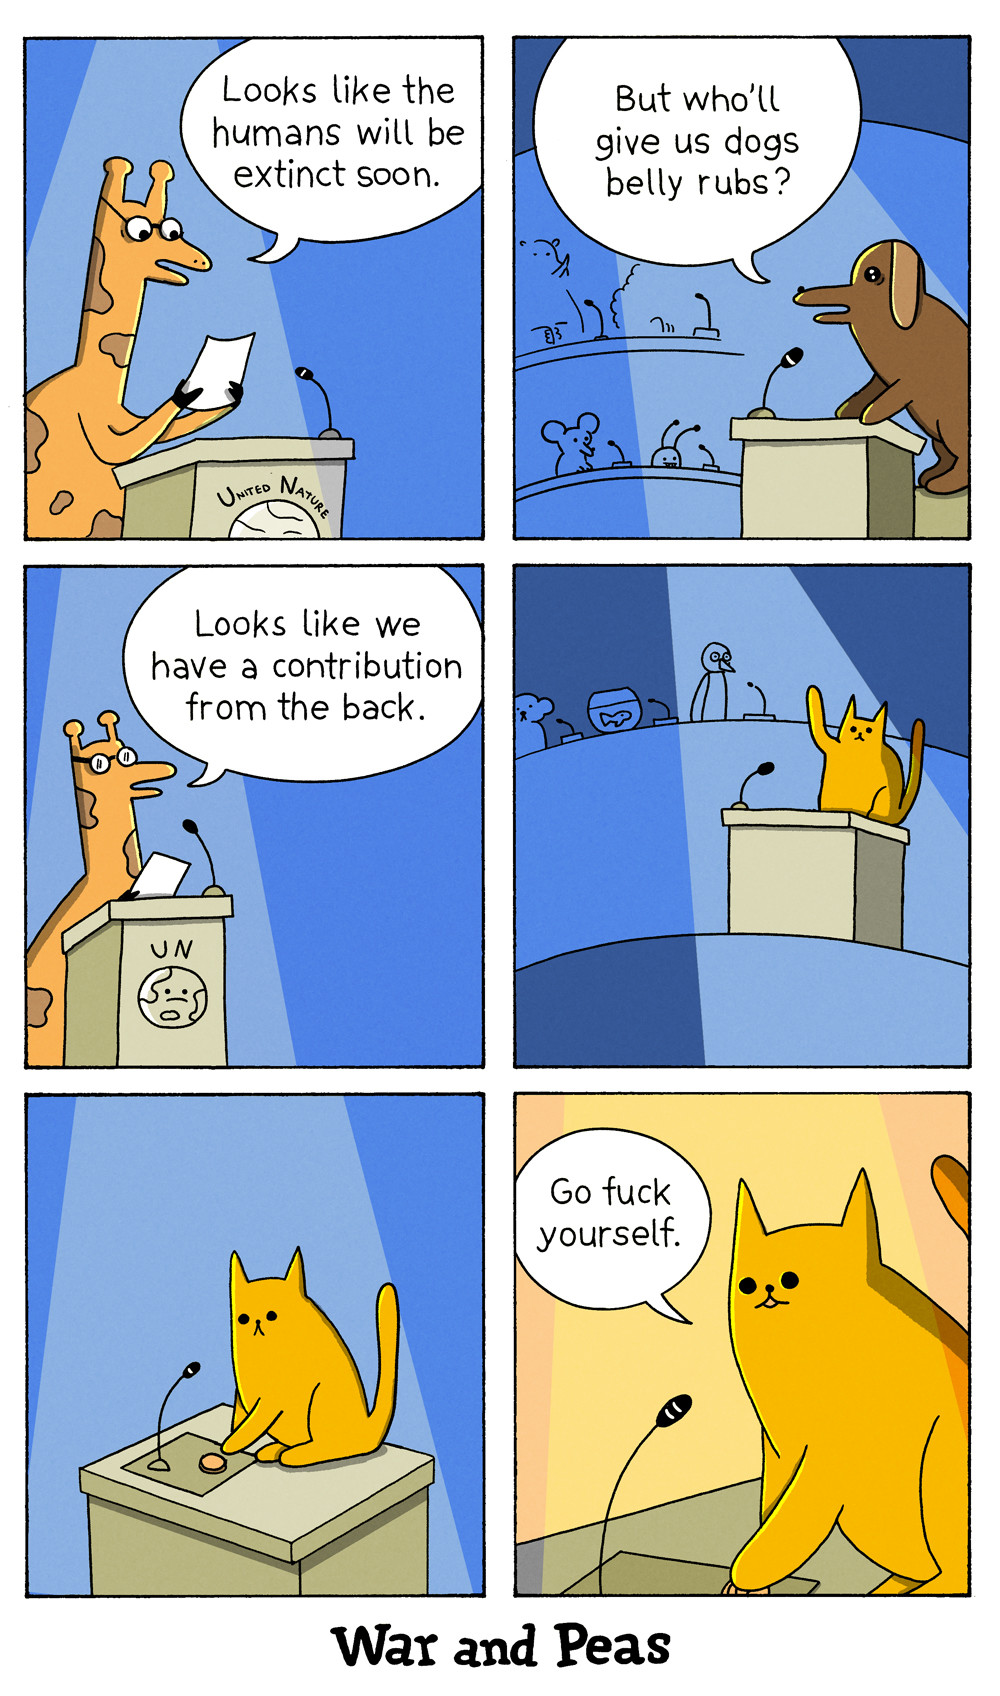 6 panel comic by War and Peas. 1. We are in the halls of United Nature. The speaker (a giraffe) states, "Looks like the humans will be extinct soon." 2. A dog asks, "But who'll give us dogs belly rubs?" 3. The giraffe says, "Looks like we have a <br />contribution from the back." 4. A cat raises his paw. 5. The cat presses the button to use the microphone. 6. The cute cat says, "Go fuck yourself."